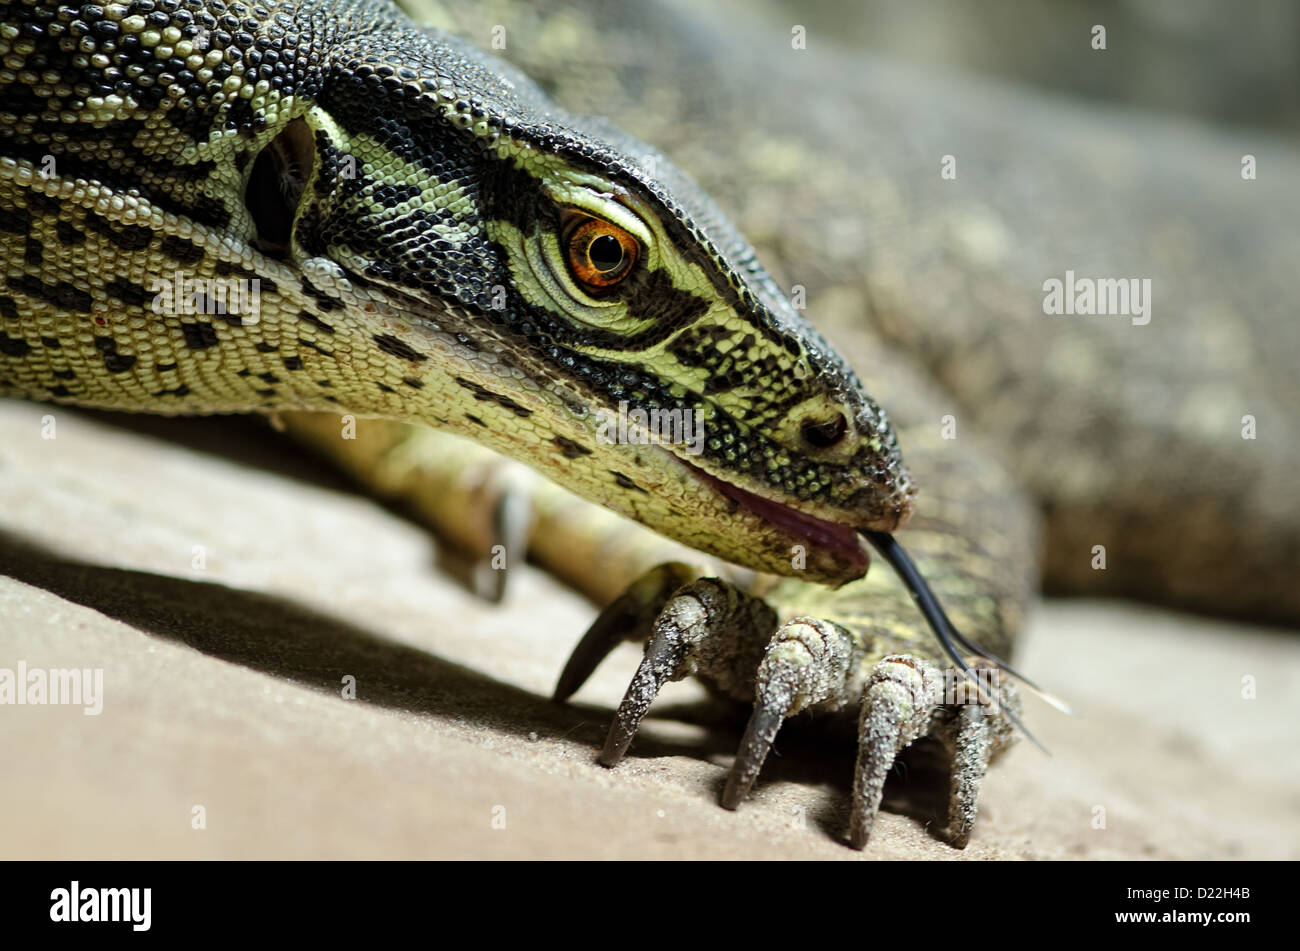 side view of the head of an Australian monitor lizard with tongue; claw of another lizard of the same species / Varanus gouldii Stock Photo